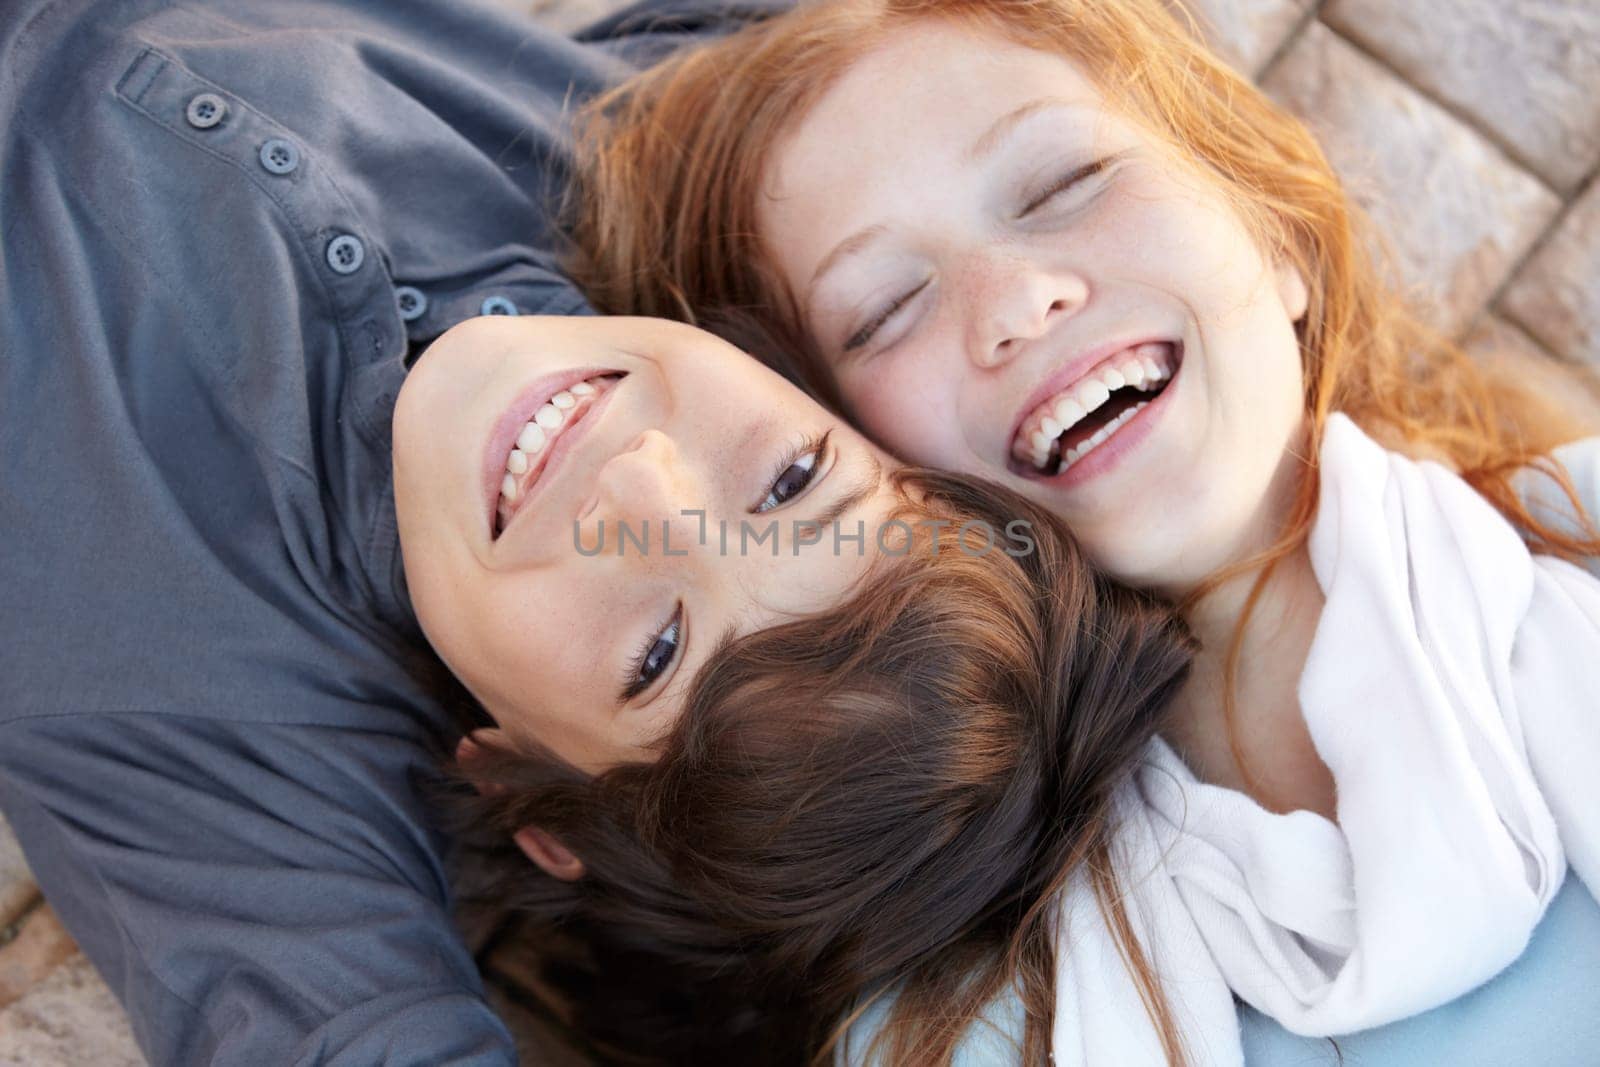 Portrait, laughing and above of friends in nature for love, bonding and happiness. Smile, care and a boy, girl or sibling children on the ground together for a funny joke, friendship or playful.